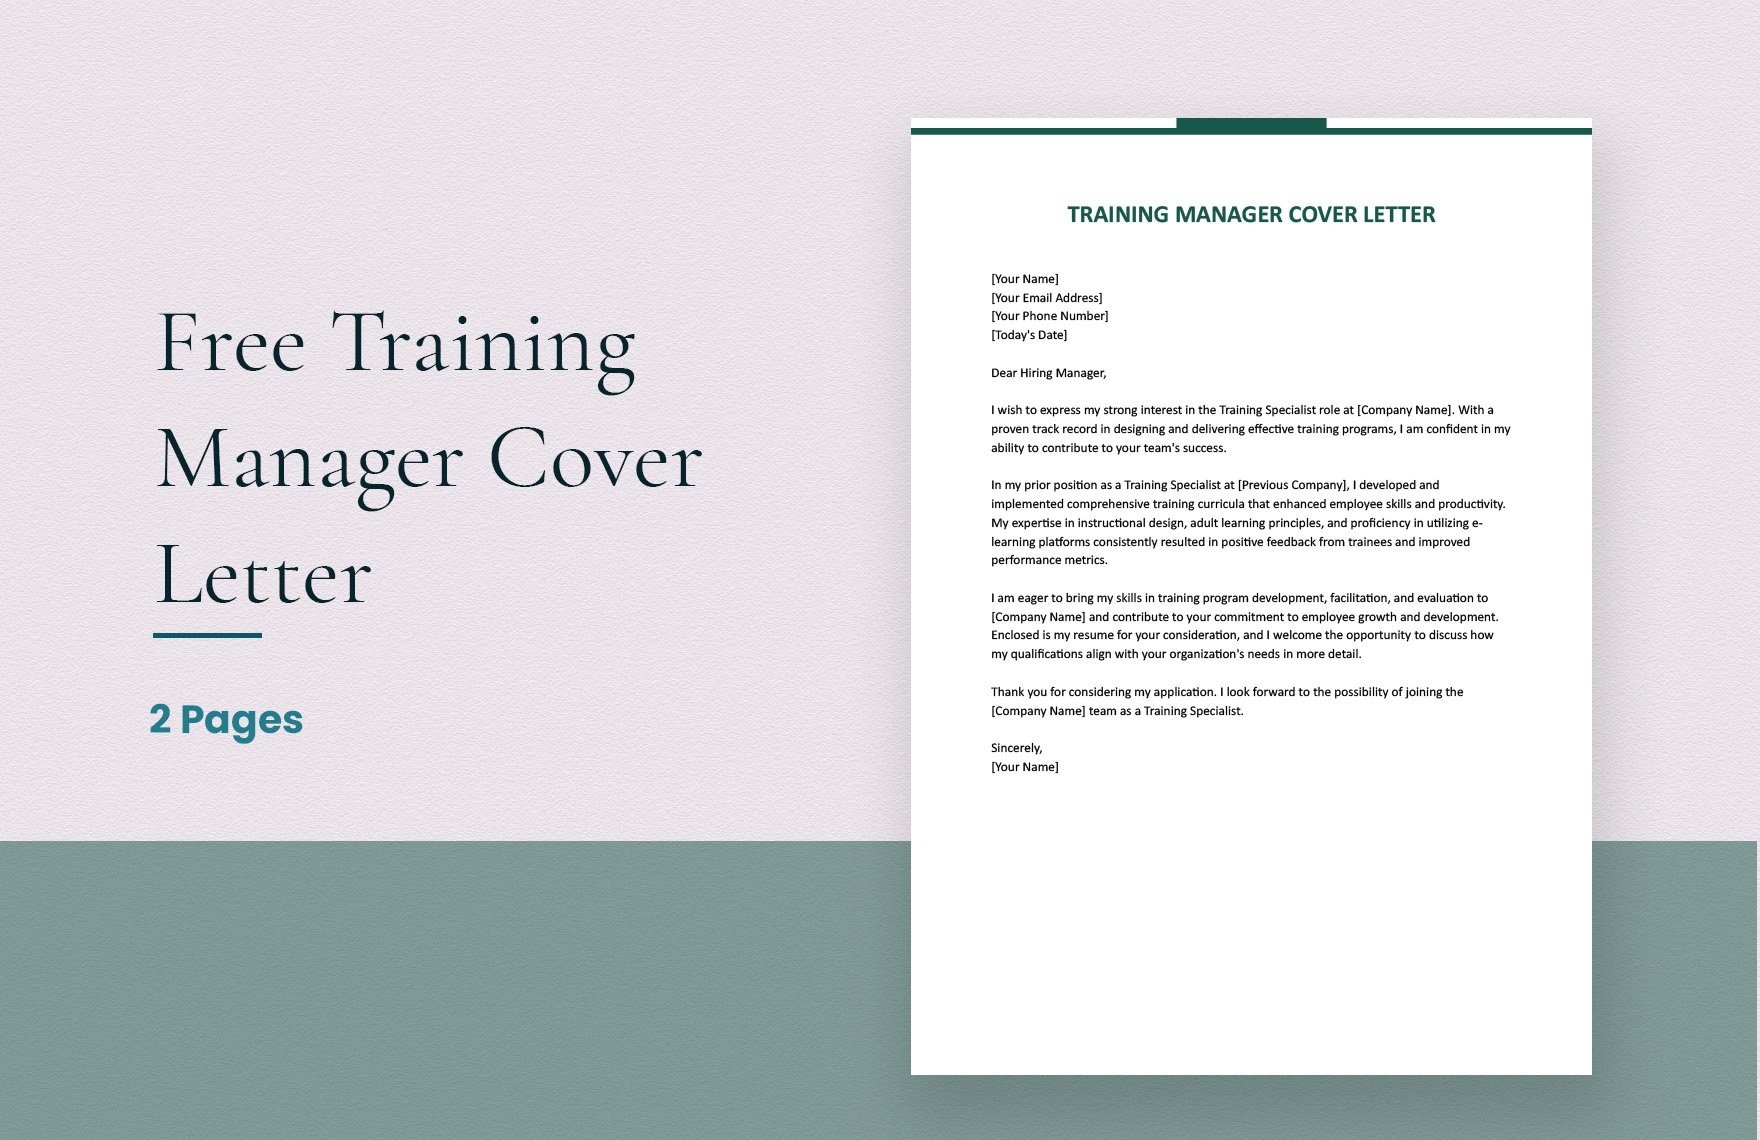 Training Manager Cover Letter in Word, Google Docs